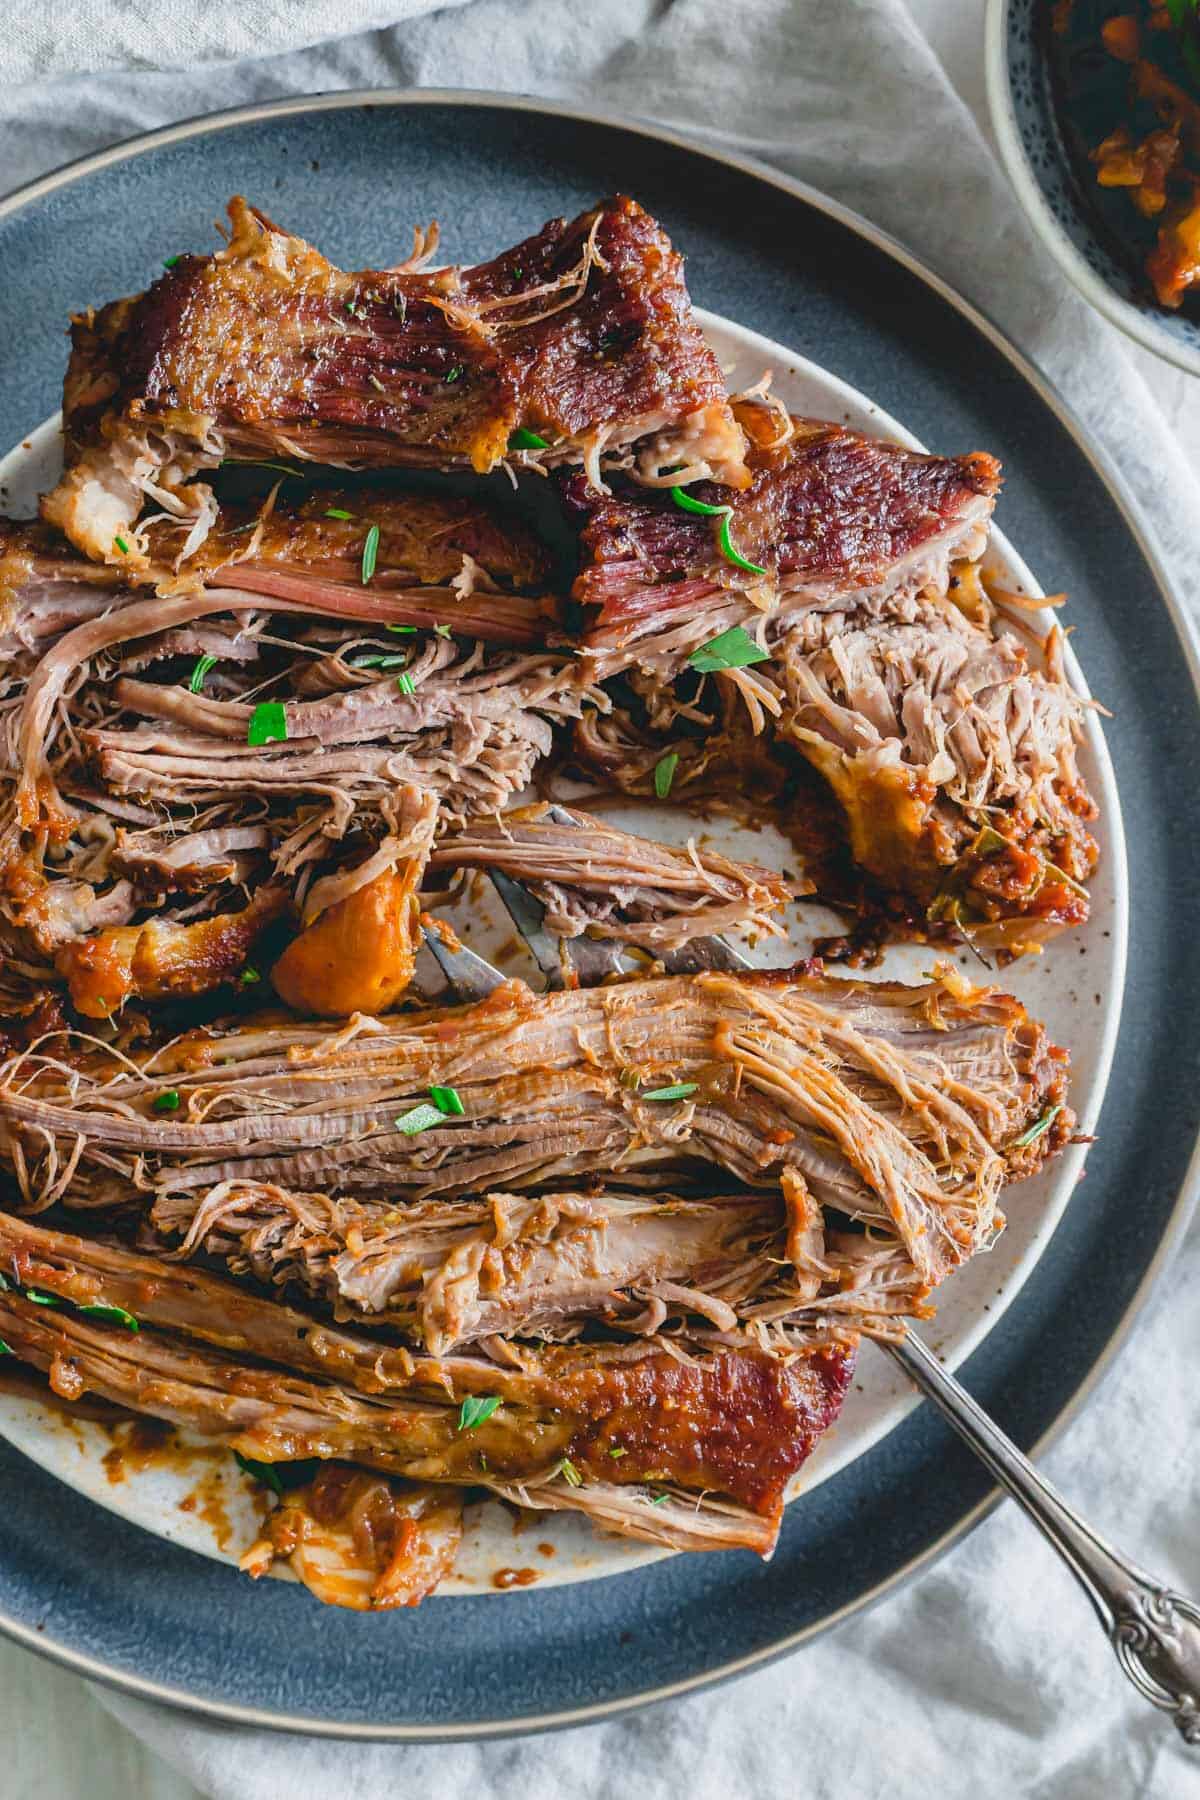 Tender braised veal brisket pulled apart into pieces on a plate with a tomato herb sauce.